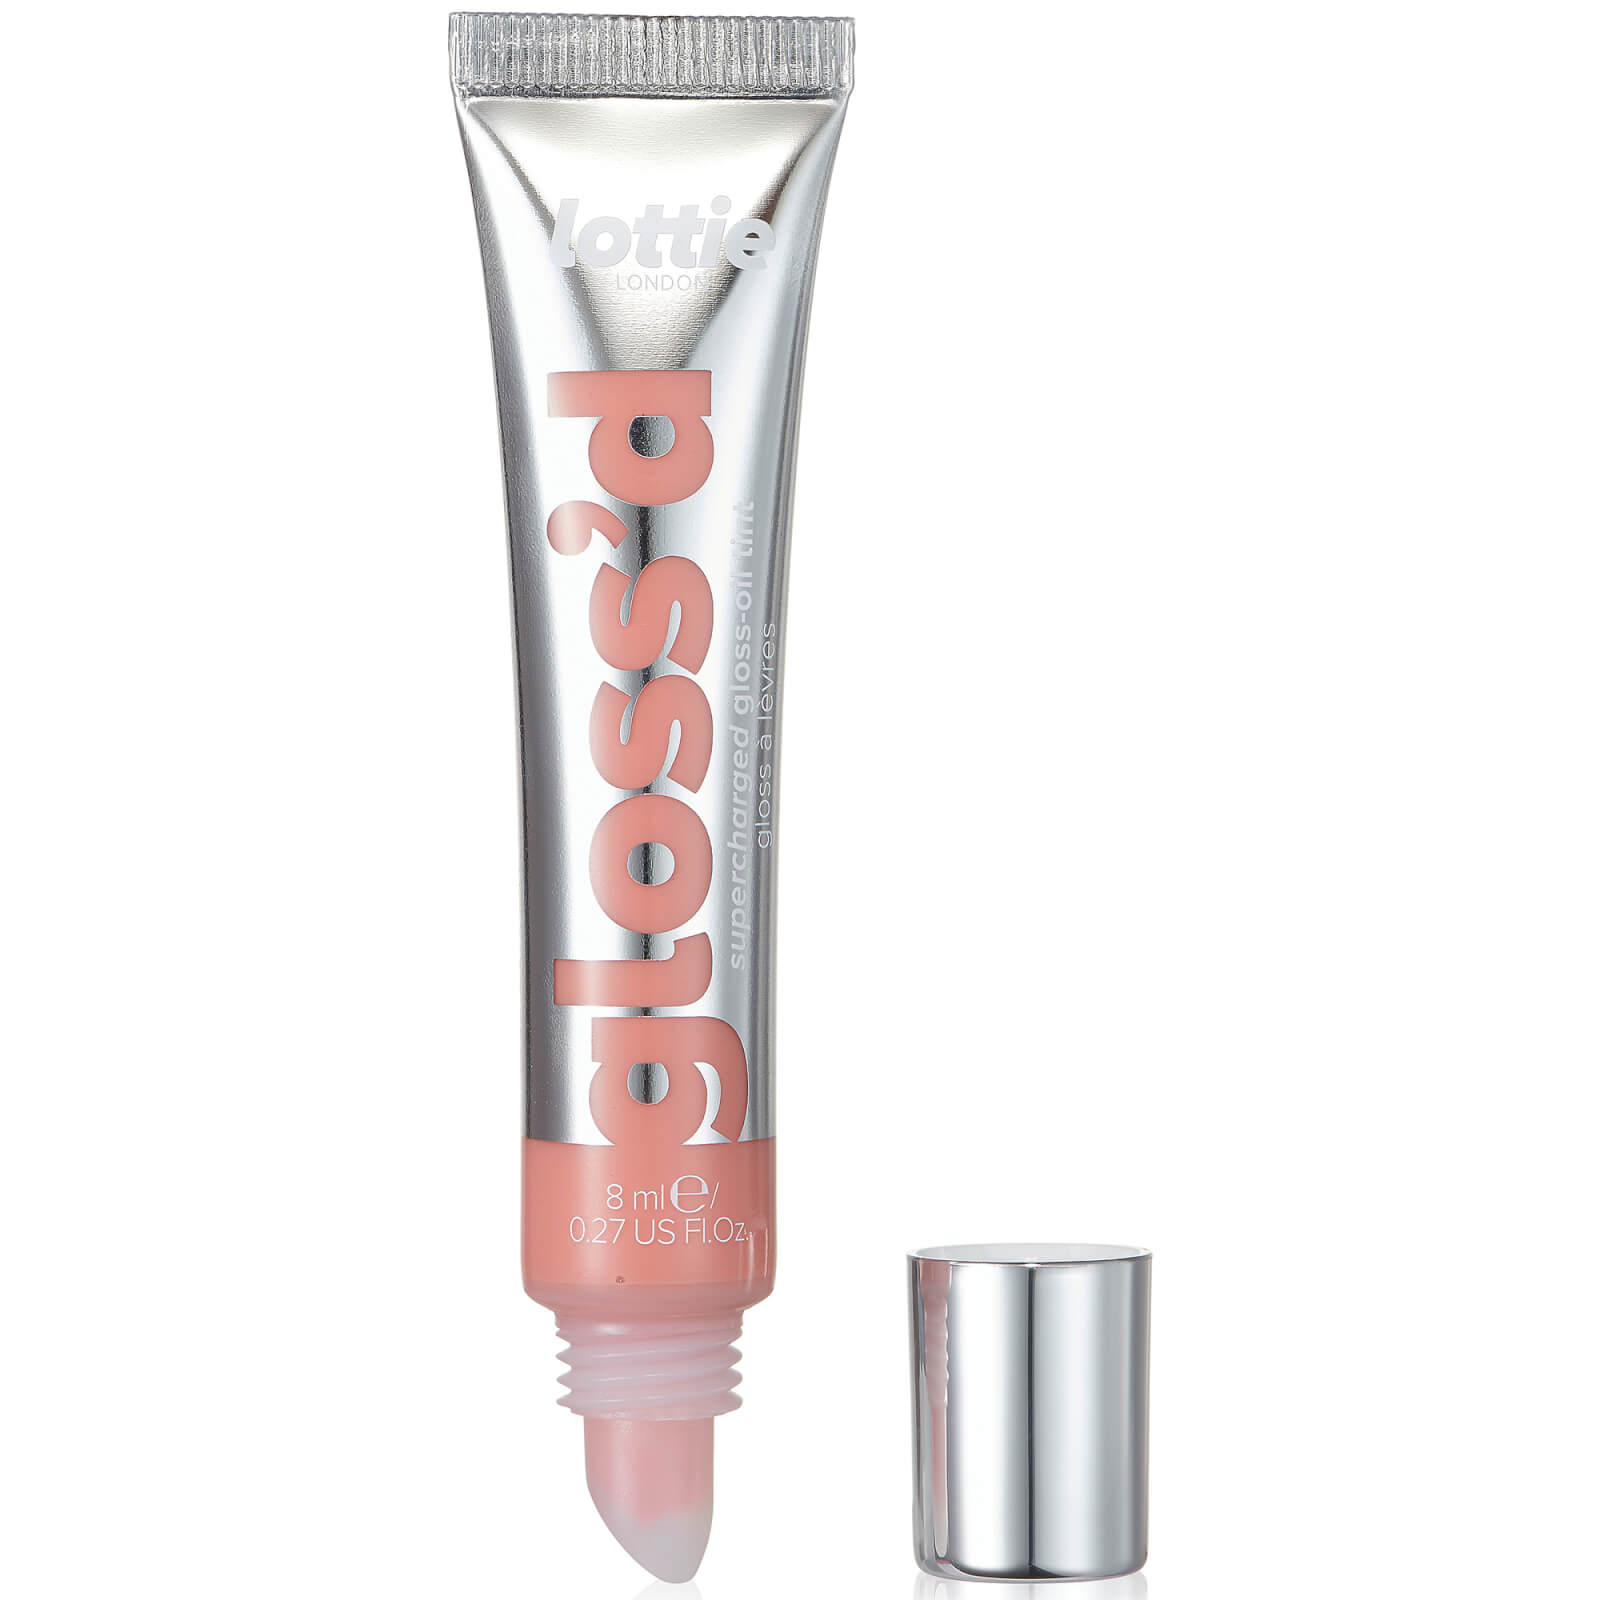 Lottie London Gloss'd Lip Gloss 14g (Various Shades) - Drenched